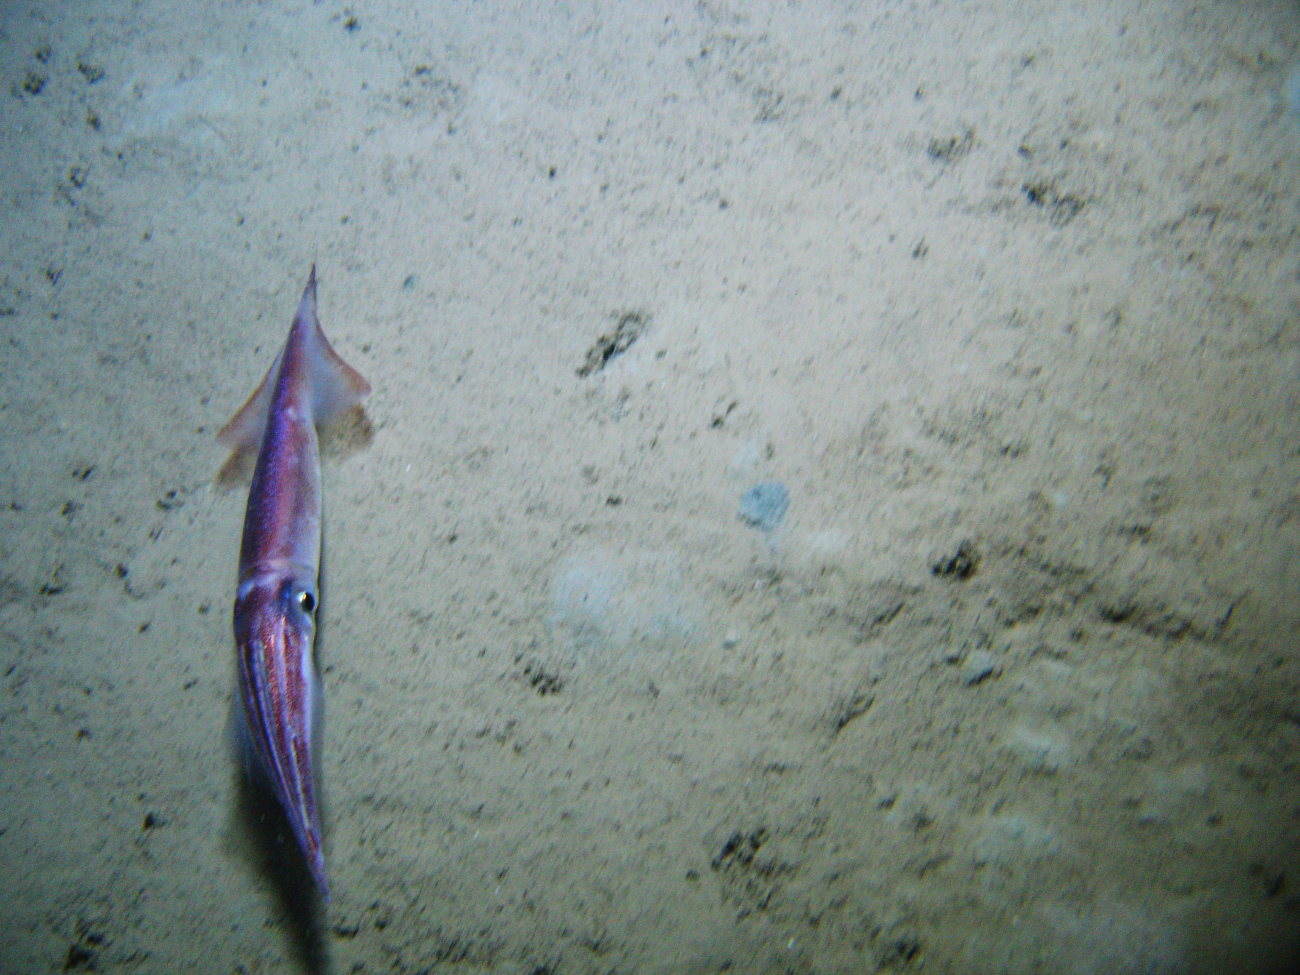 Squid in close proximity to bottom